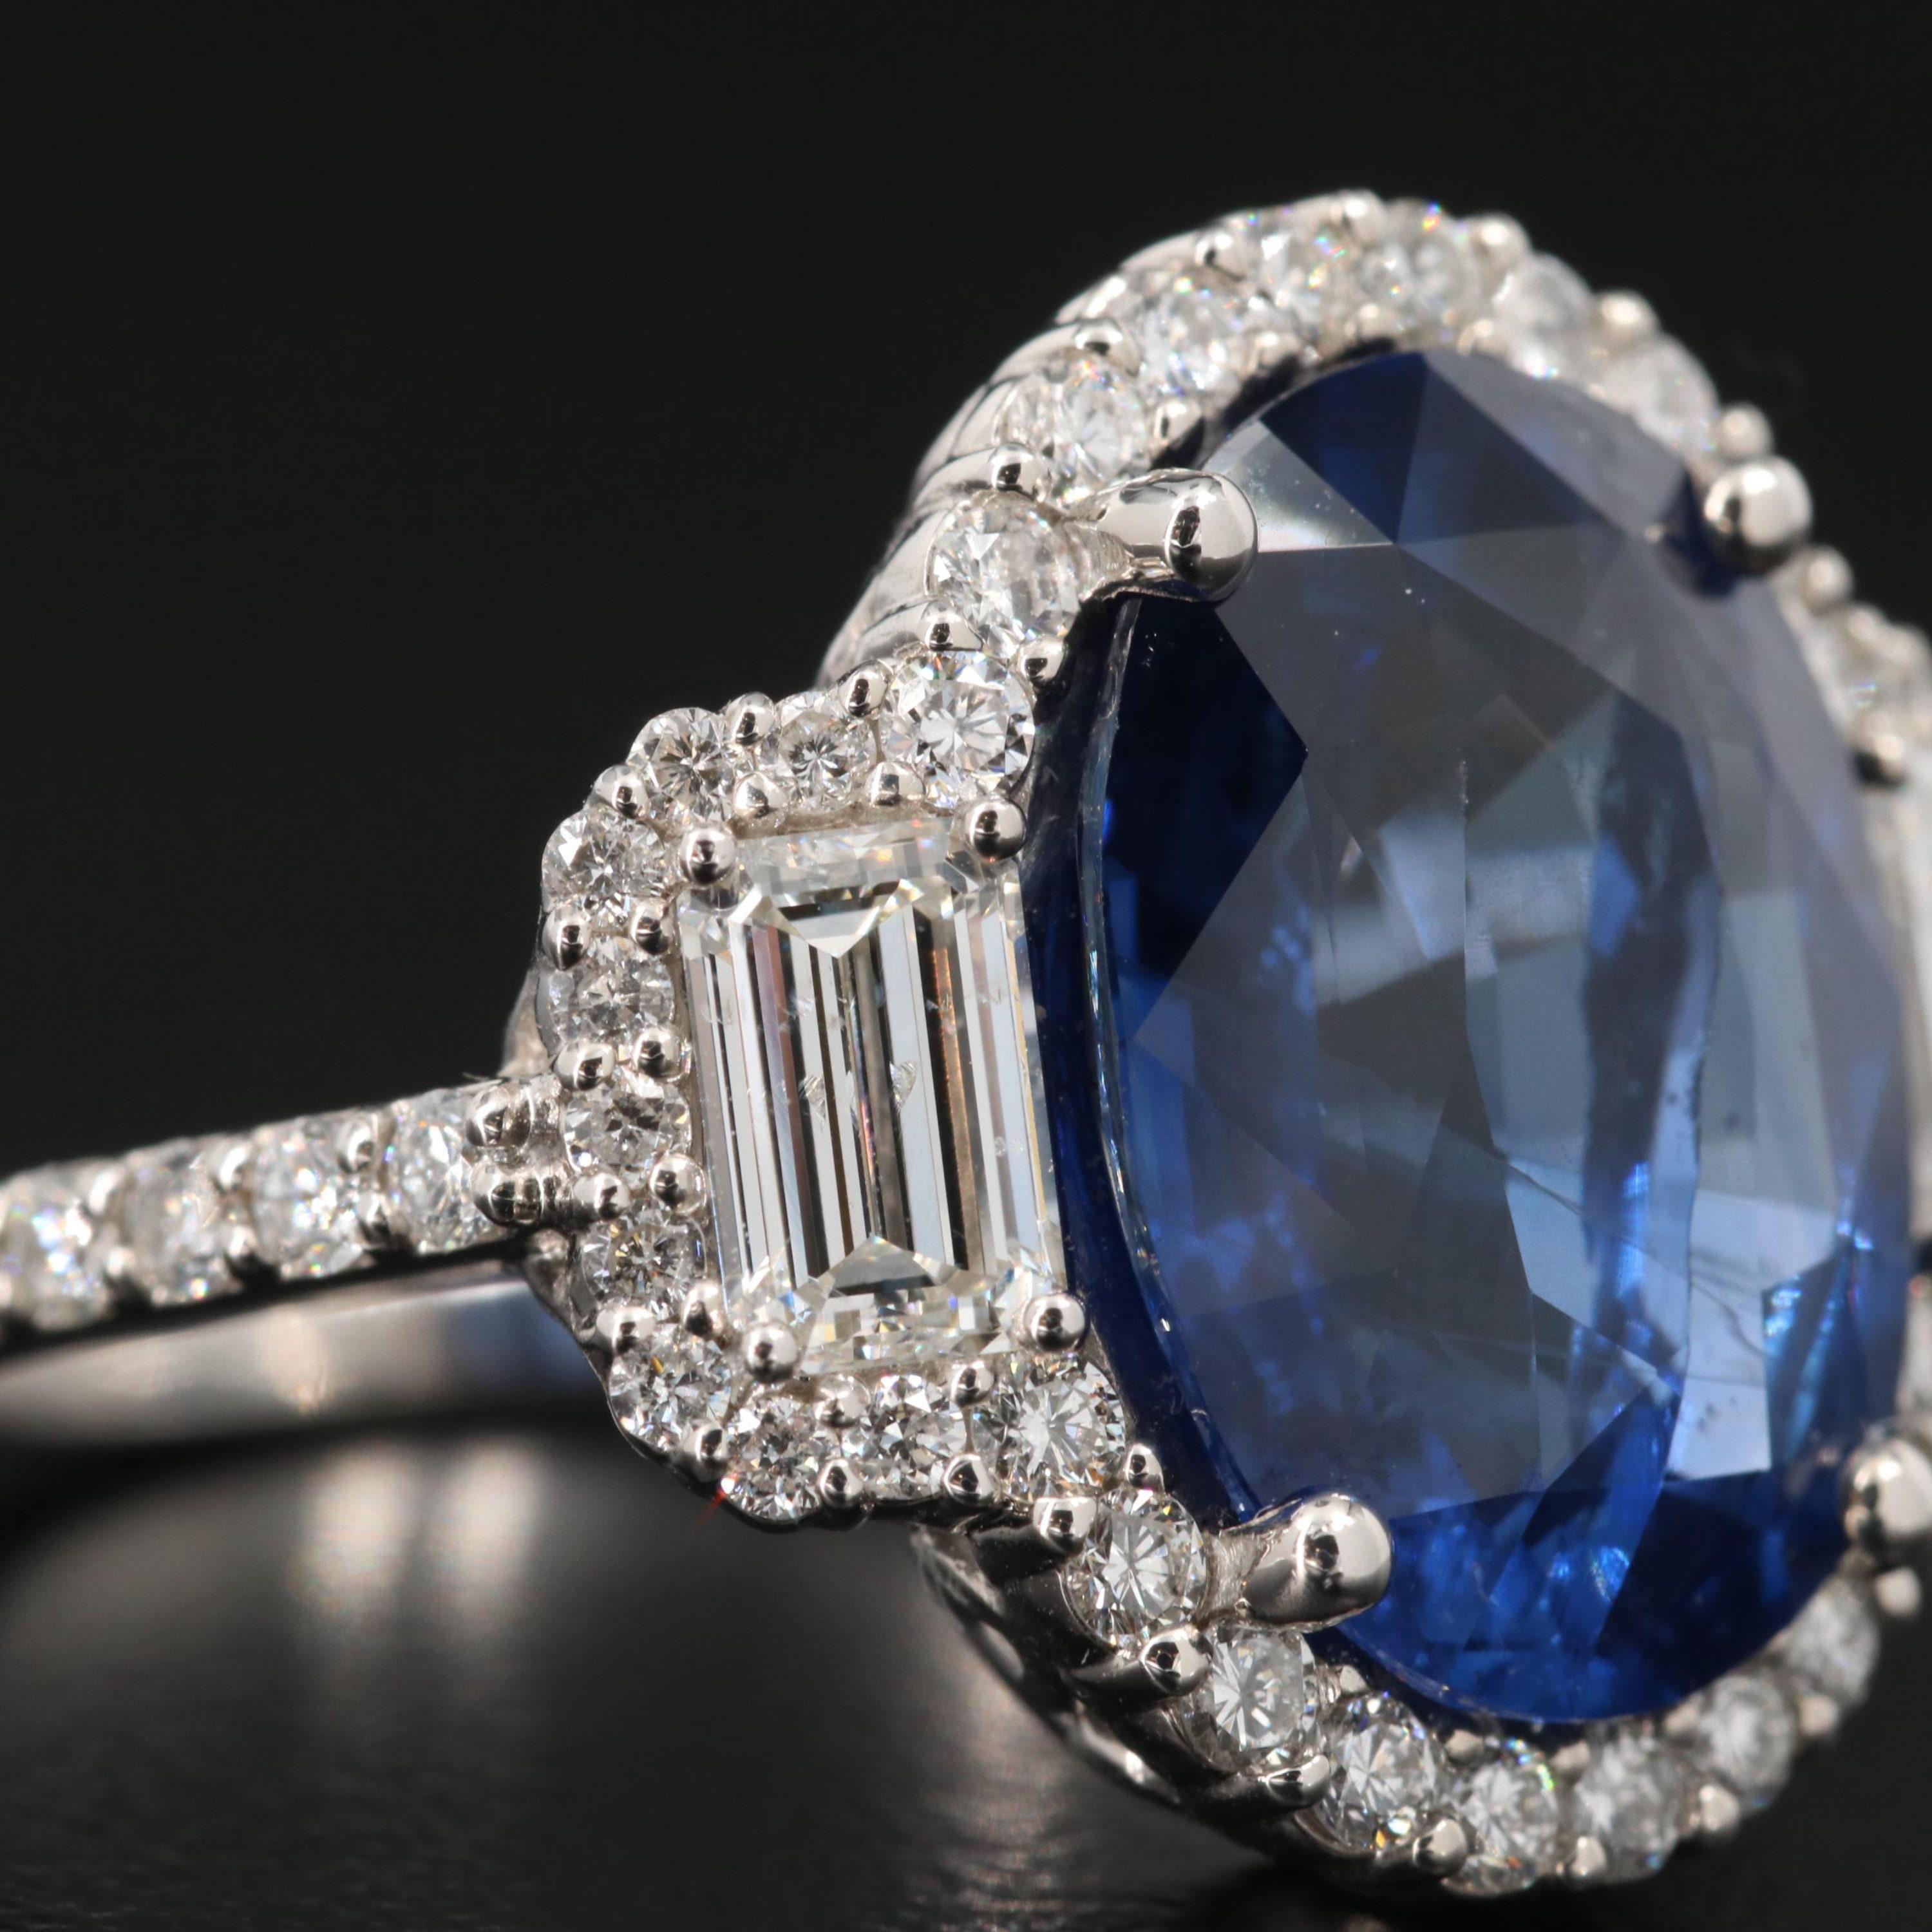 For Sale:  5 Carat Natural Sapphire Diamond Engagement Ring Set in 18K Gold, Cocktail Ring 7